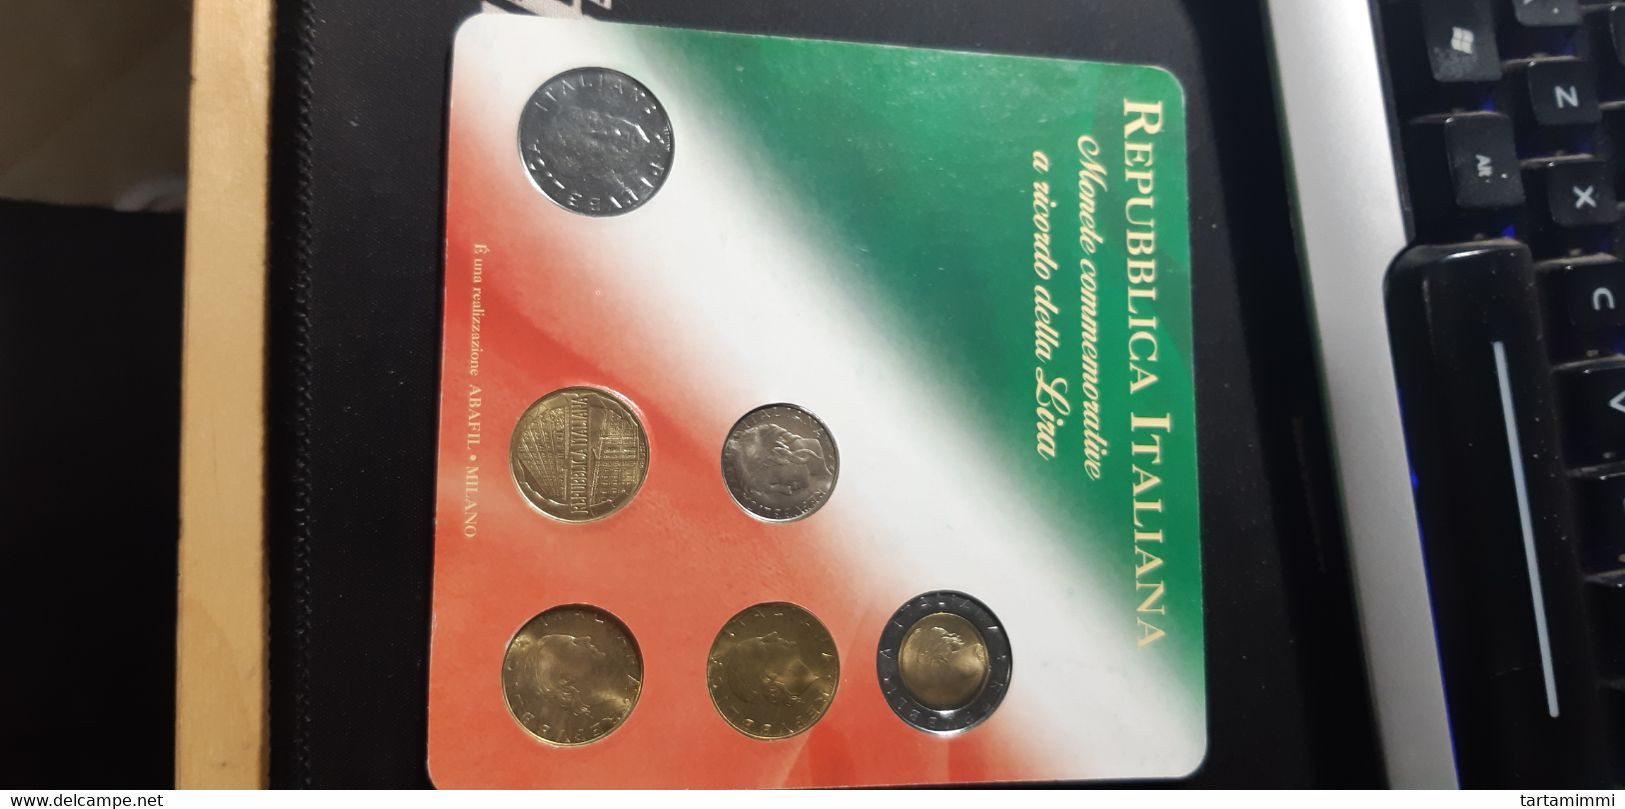 Italy coins lira FDC collection